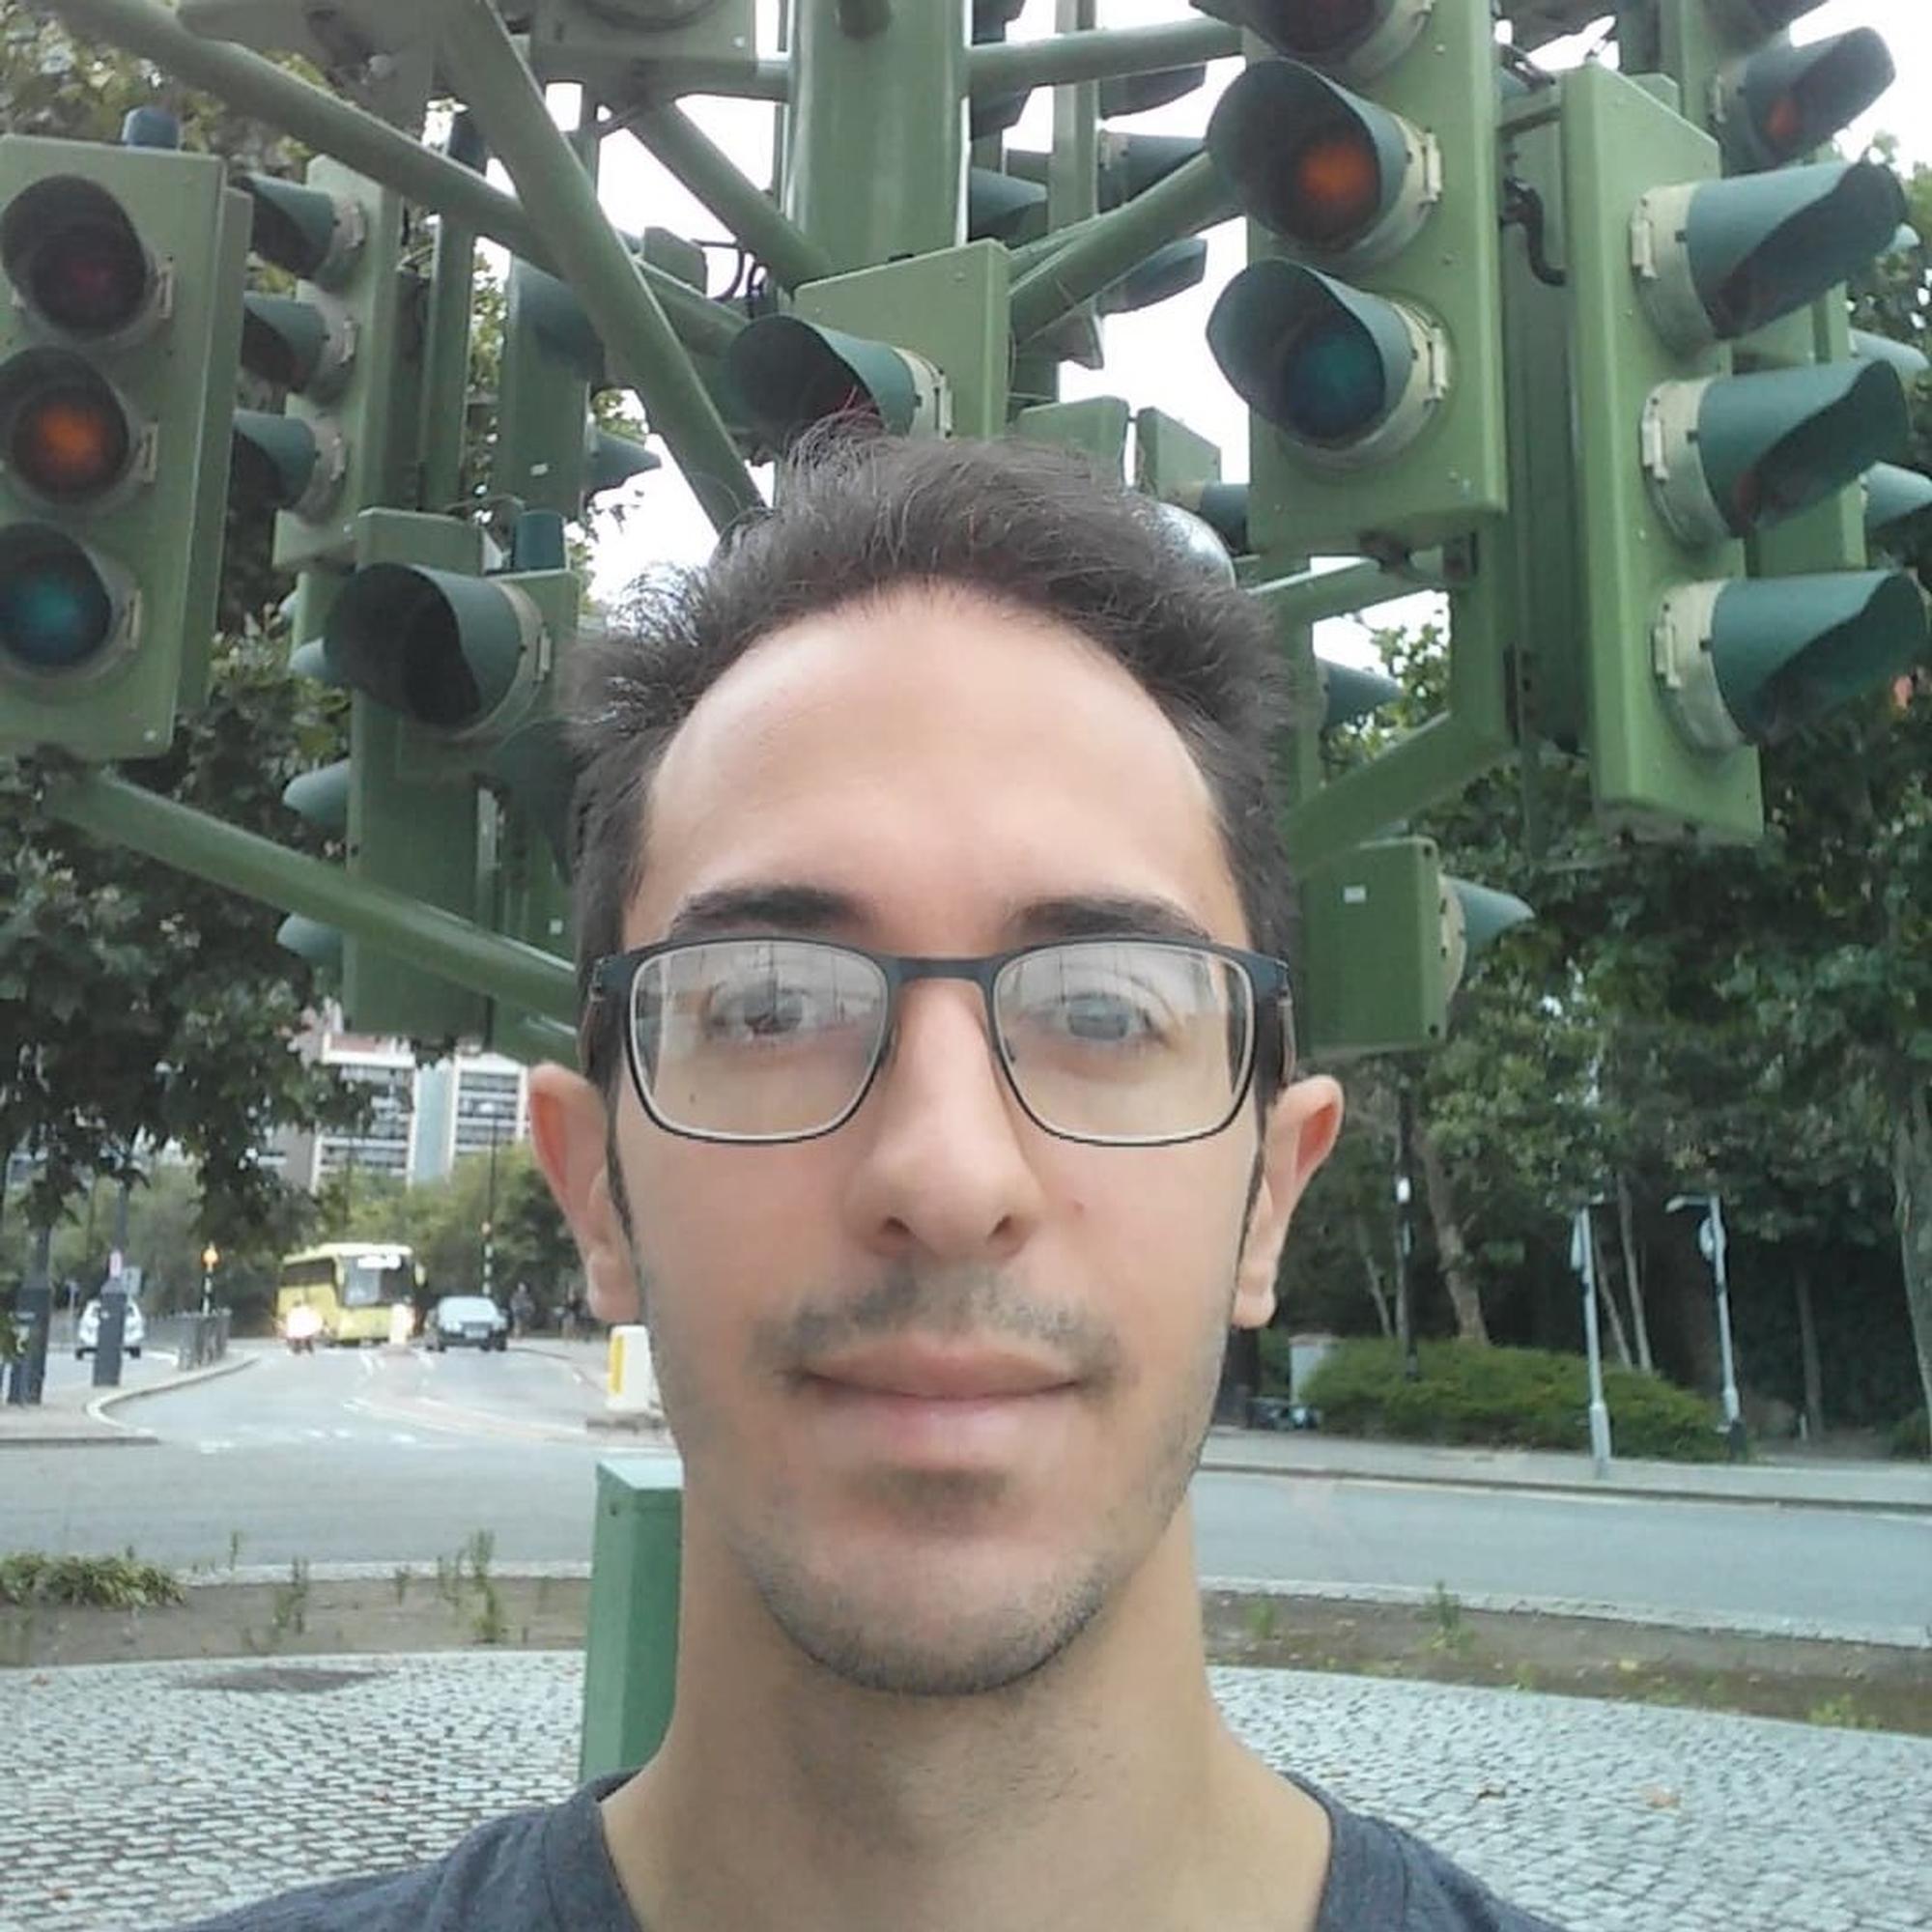 Dustin Carlino will led the open source session at Modelling World